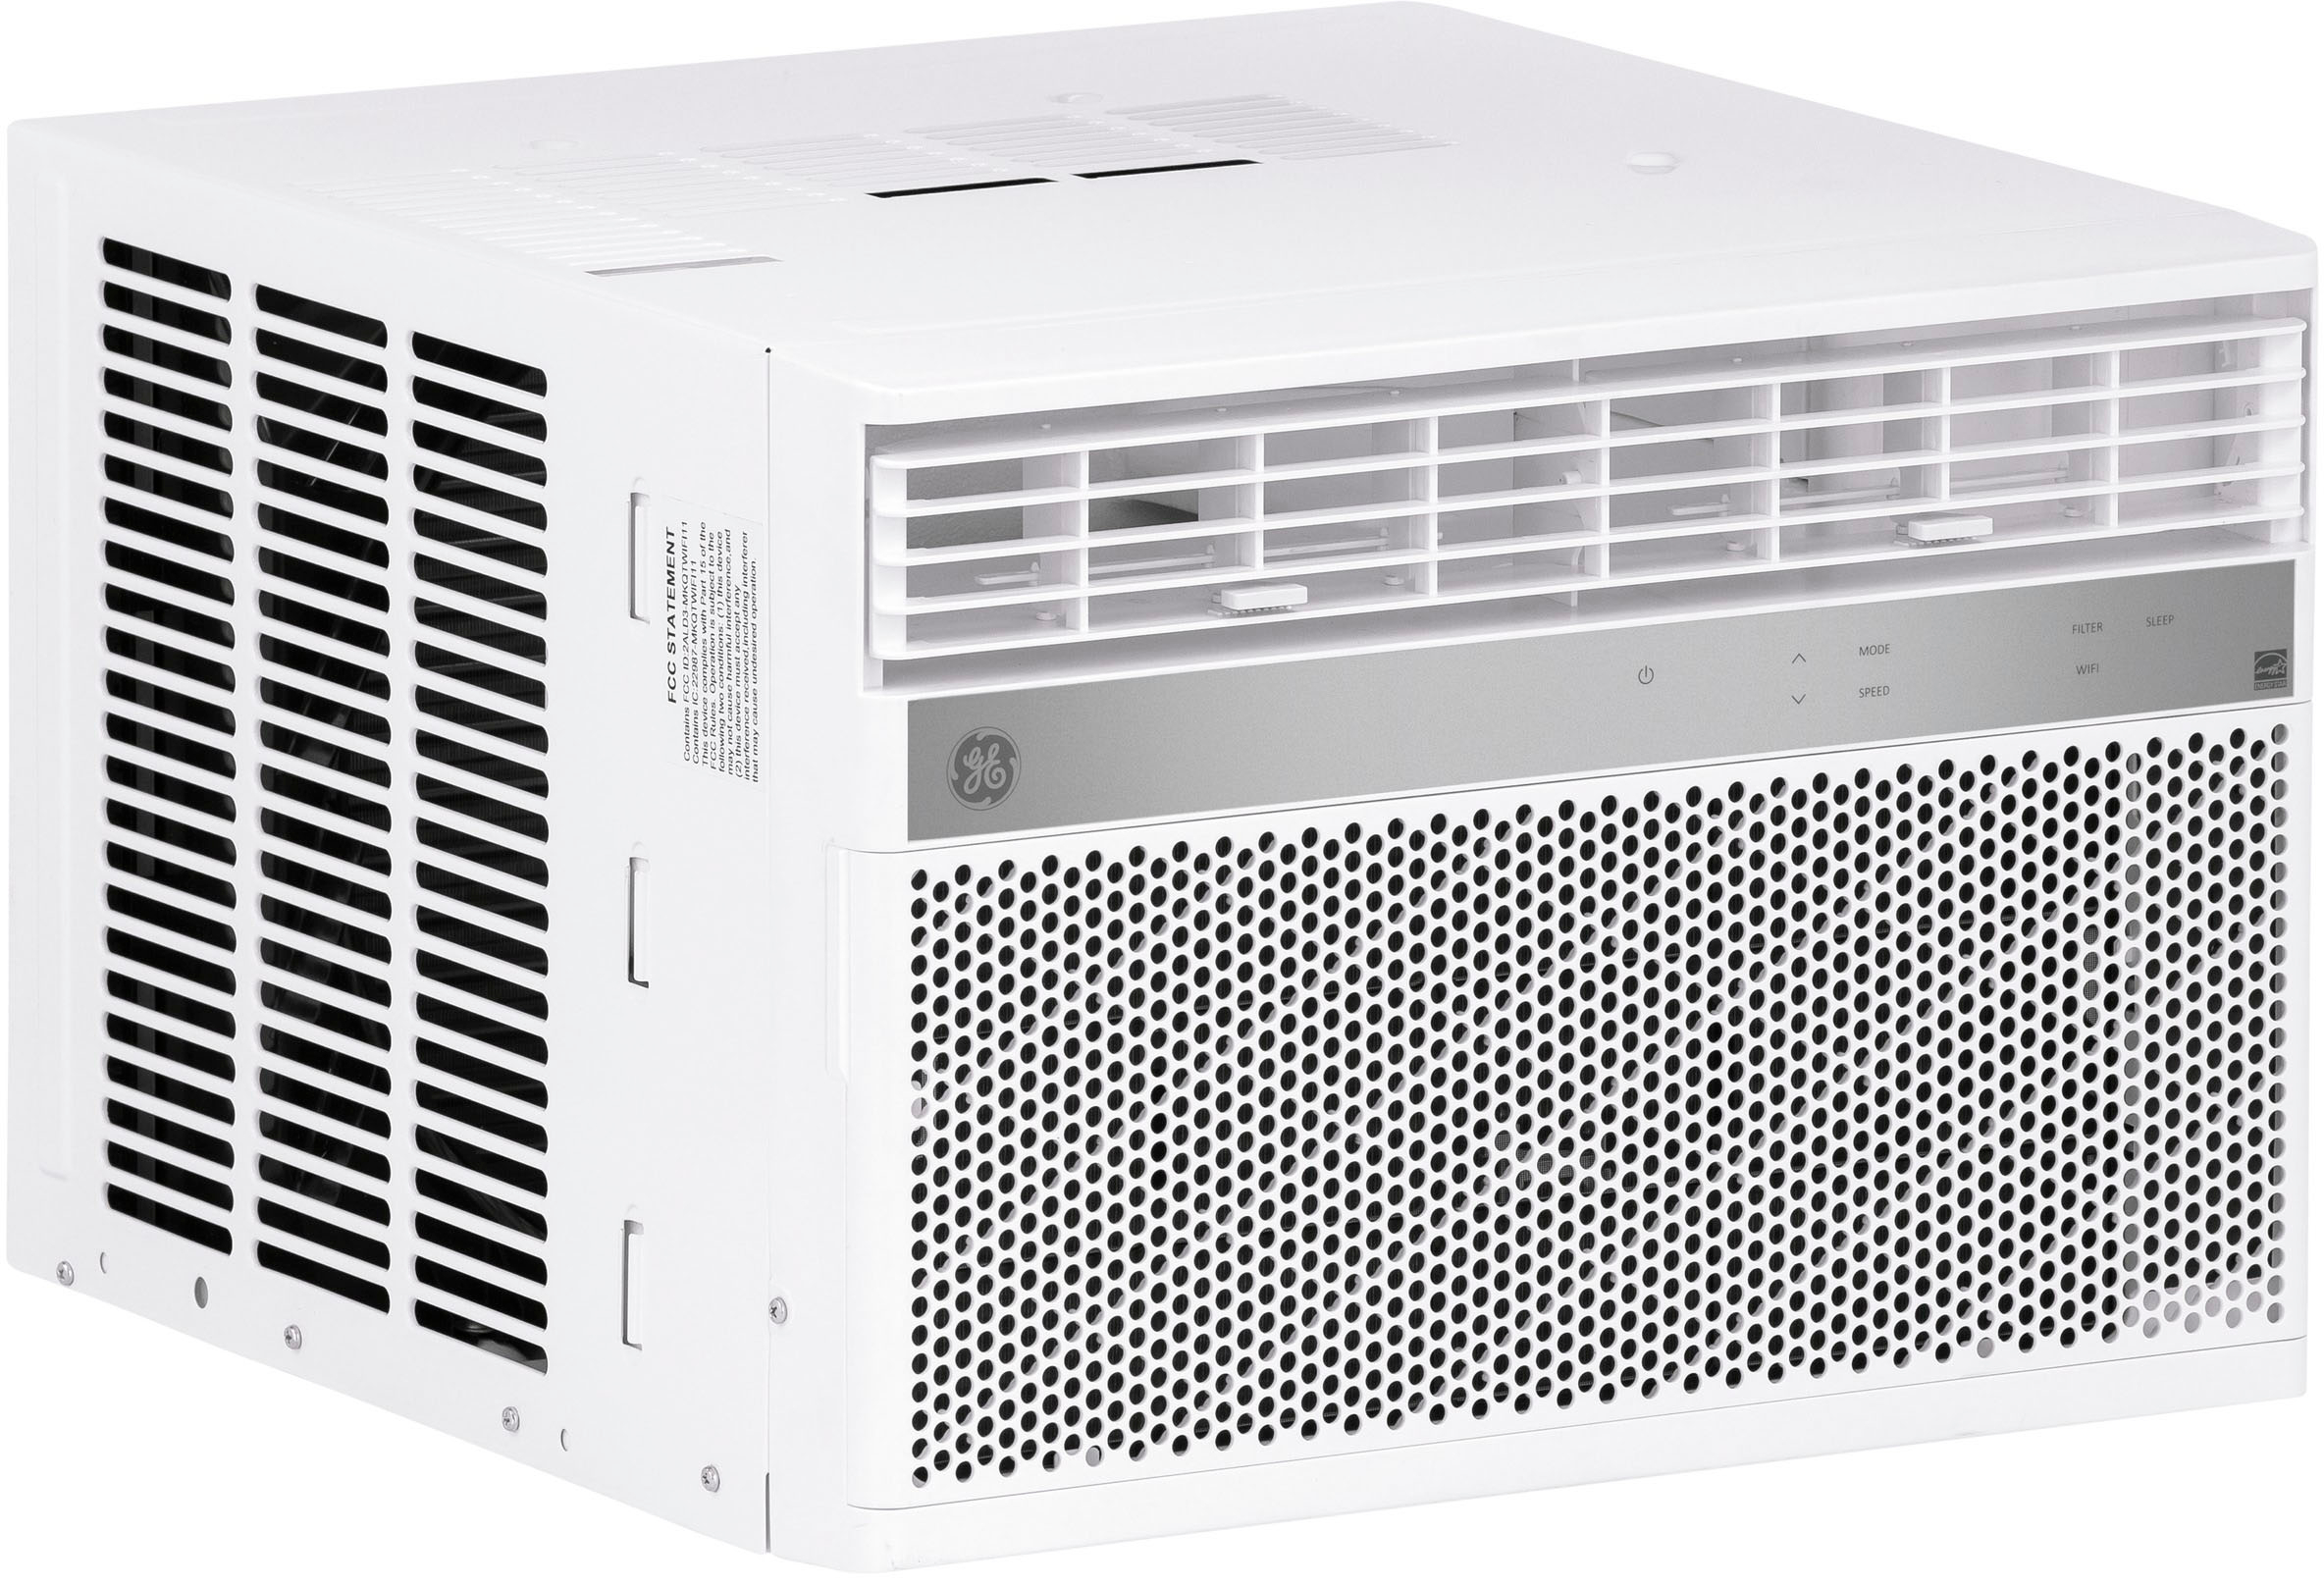 GE – 550 Sq. Ft. 12,000 BTU Smart Window Air Conditioner with WiFi and Remote – White – Just $349.99 at Best Buy